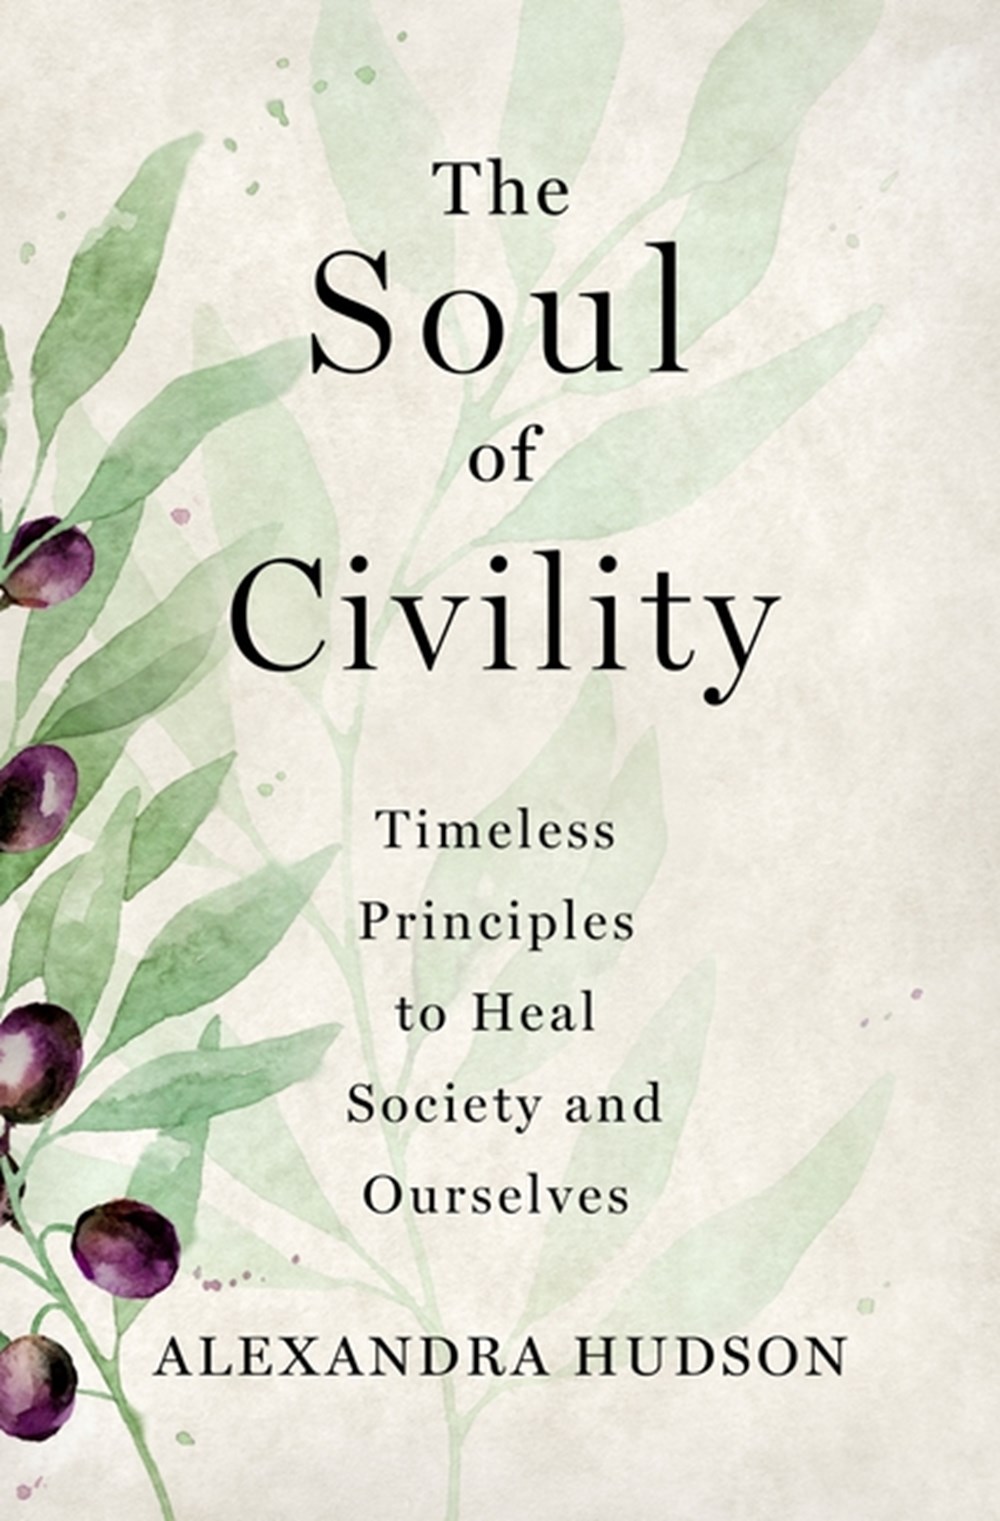 Soul of Civility: Timeless Principles to Heal Society and Ourselves